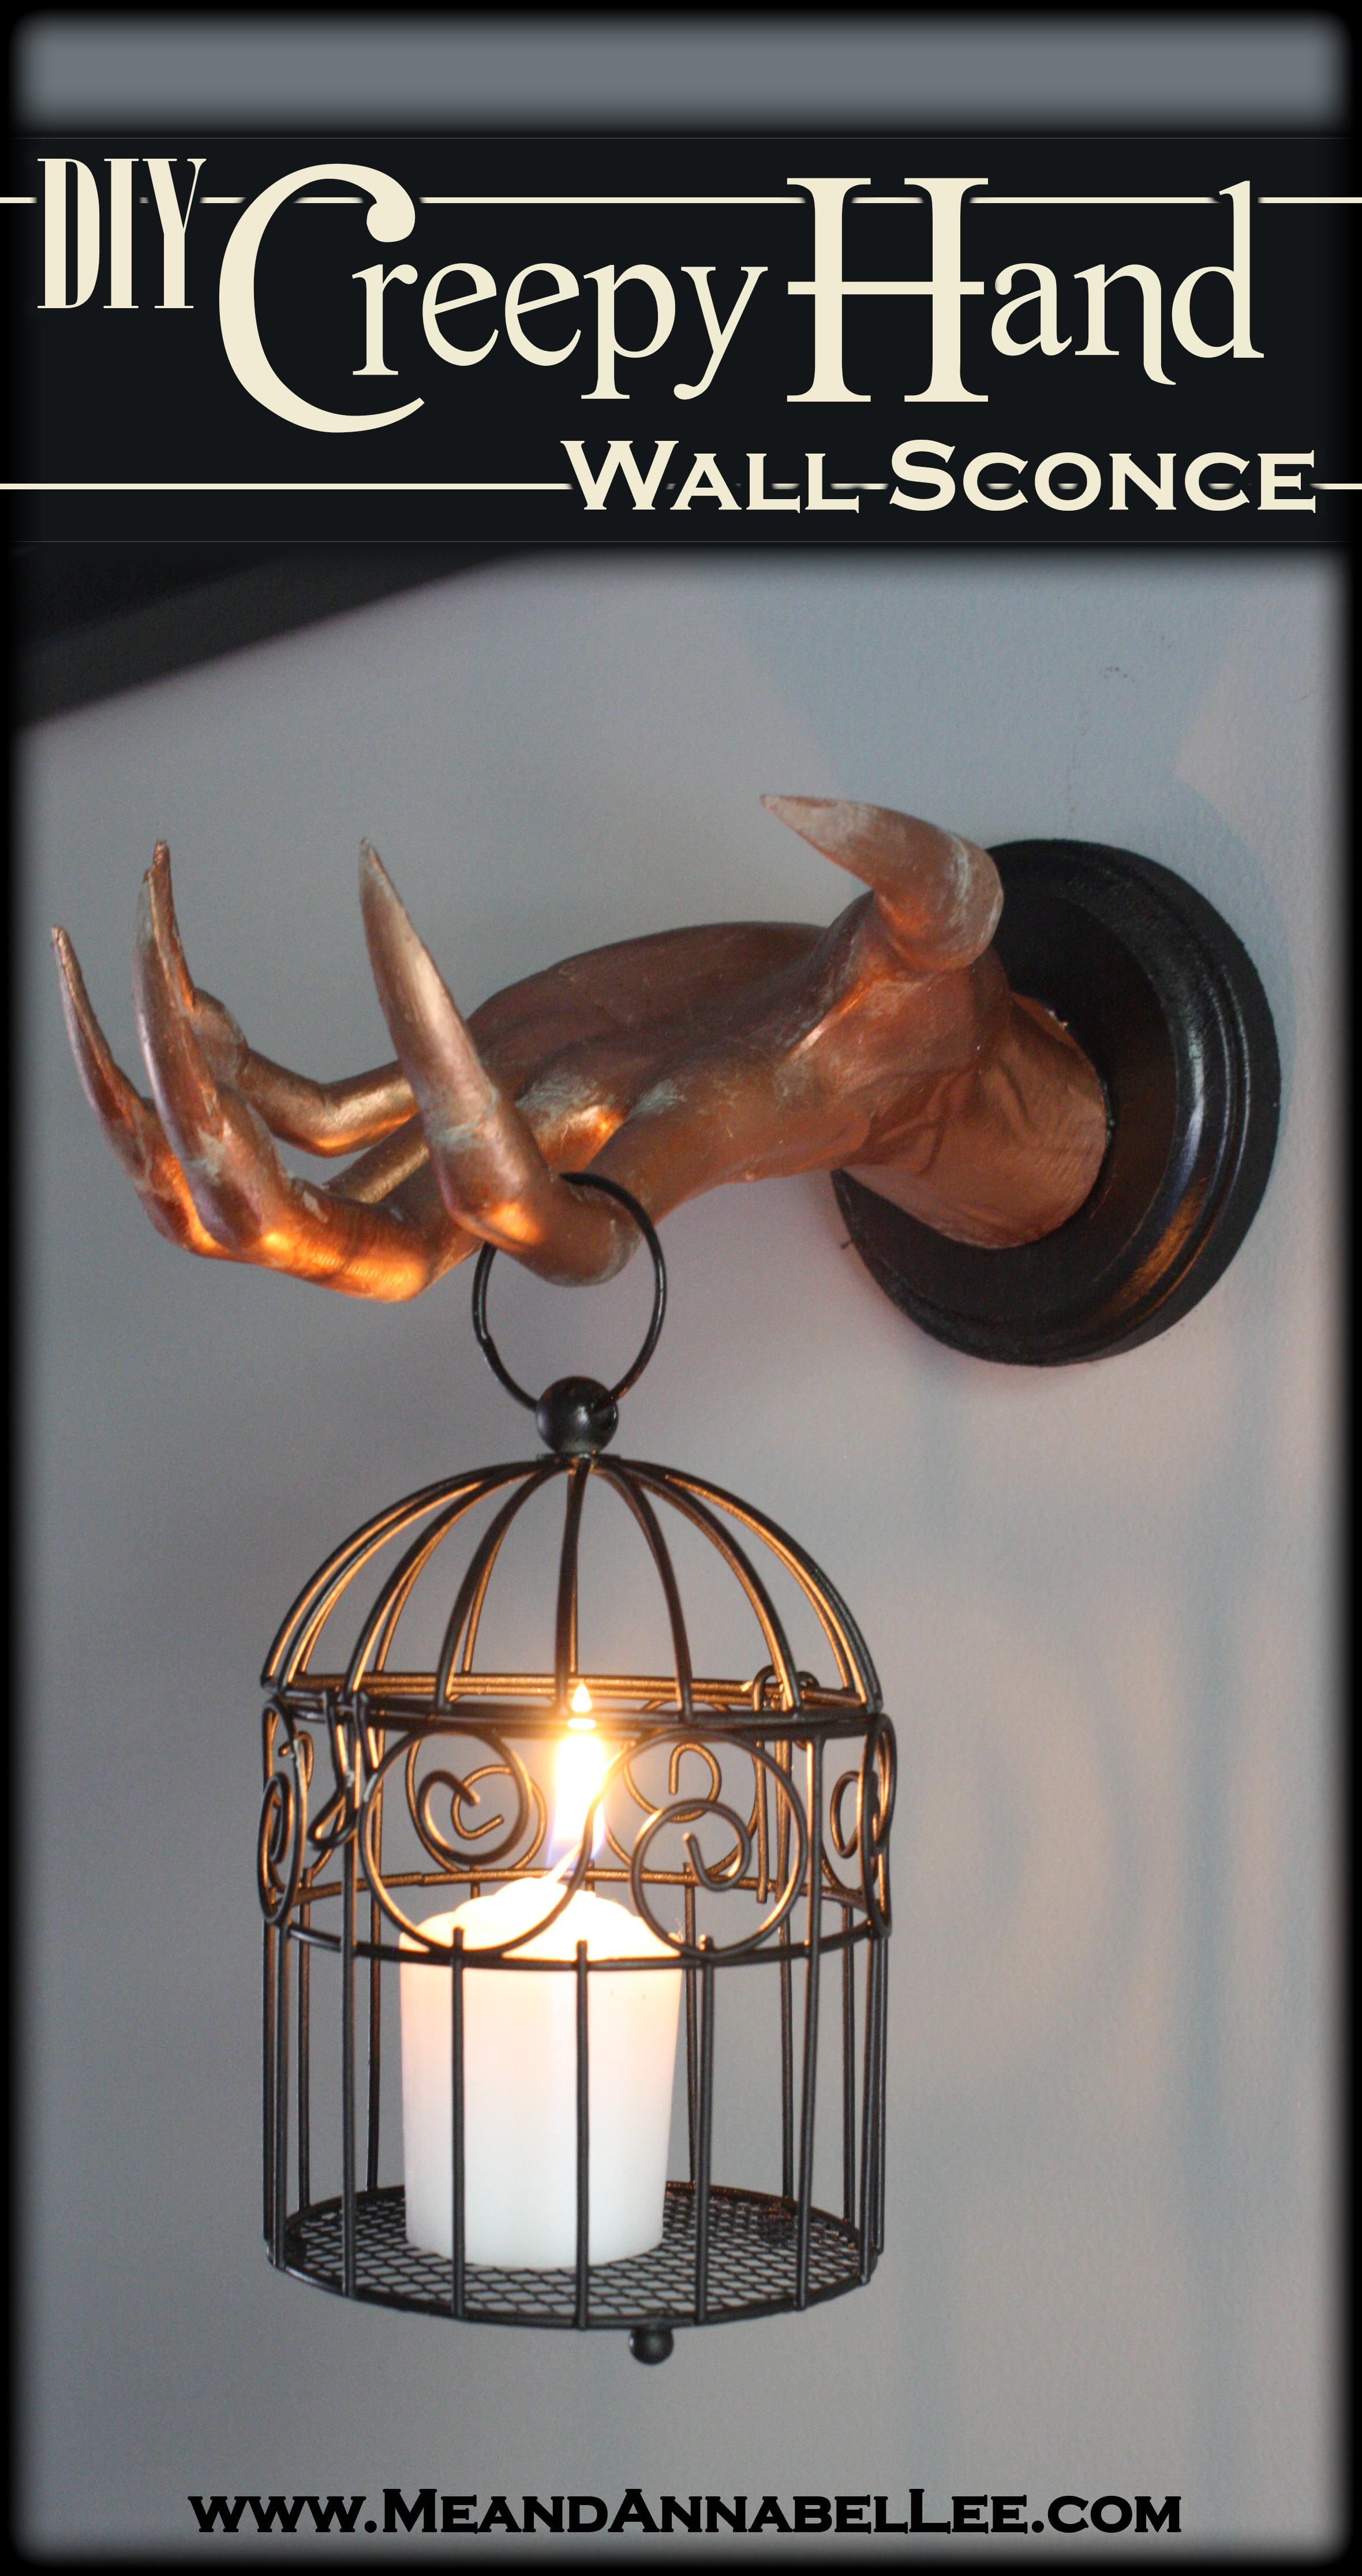 DIY Creepy Hand Wall Sconce Candle Holder – Transform a Fake Hand from Halloween Decoration to Gothic Home Décor with this makeover….. Patina Copper, Vampire like fingernails| Me and Annabel Lee Blog